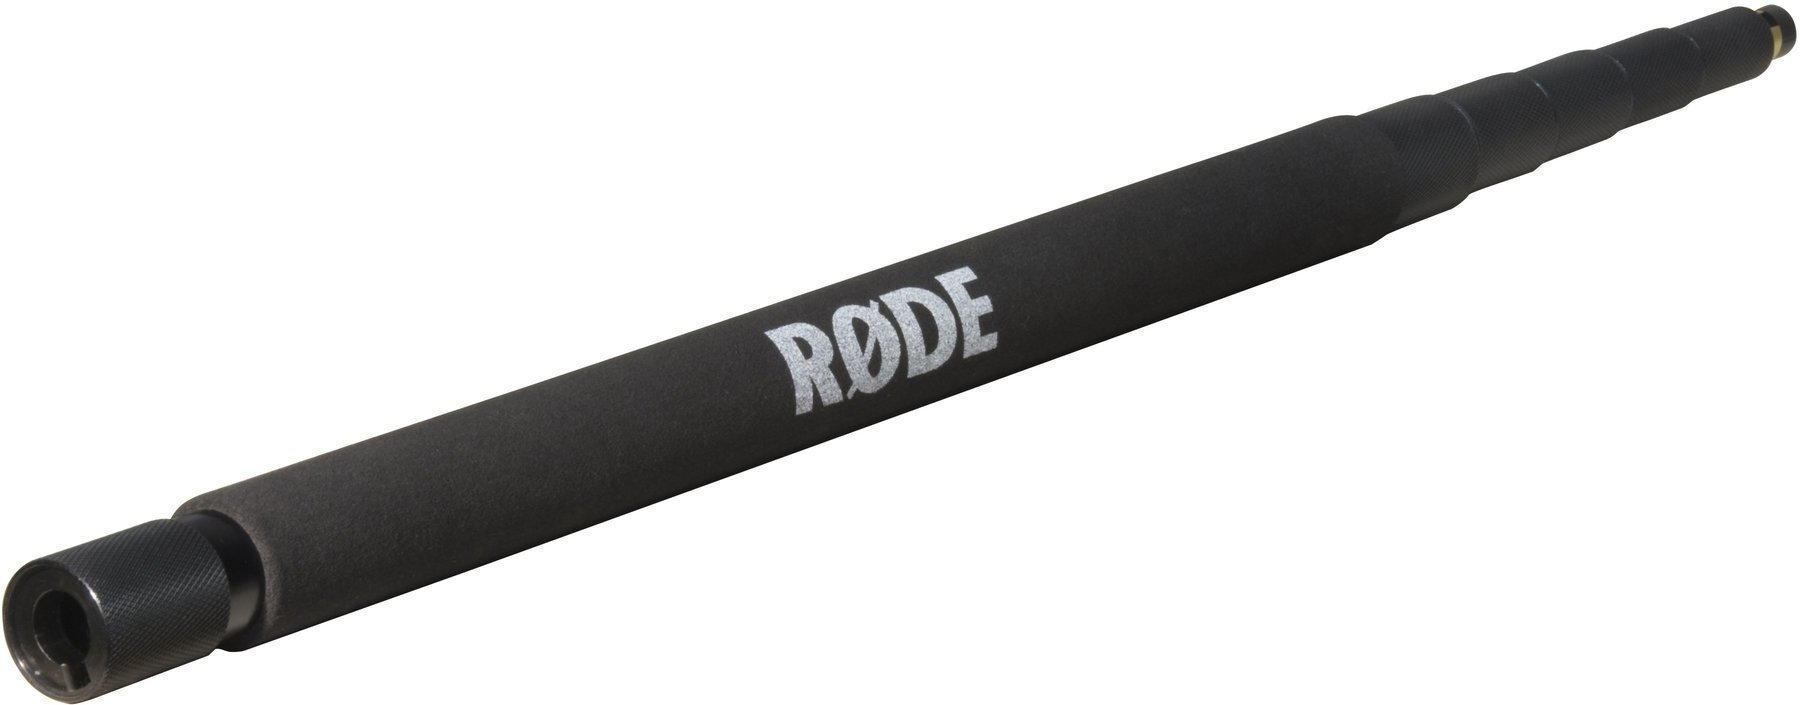 Accessory for microphone stand Rode BoomPole Pro Accessory for microphone stand